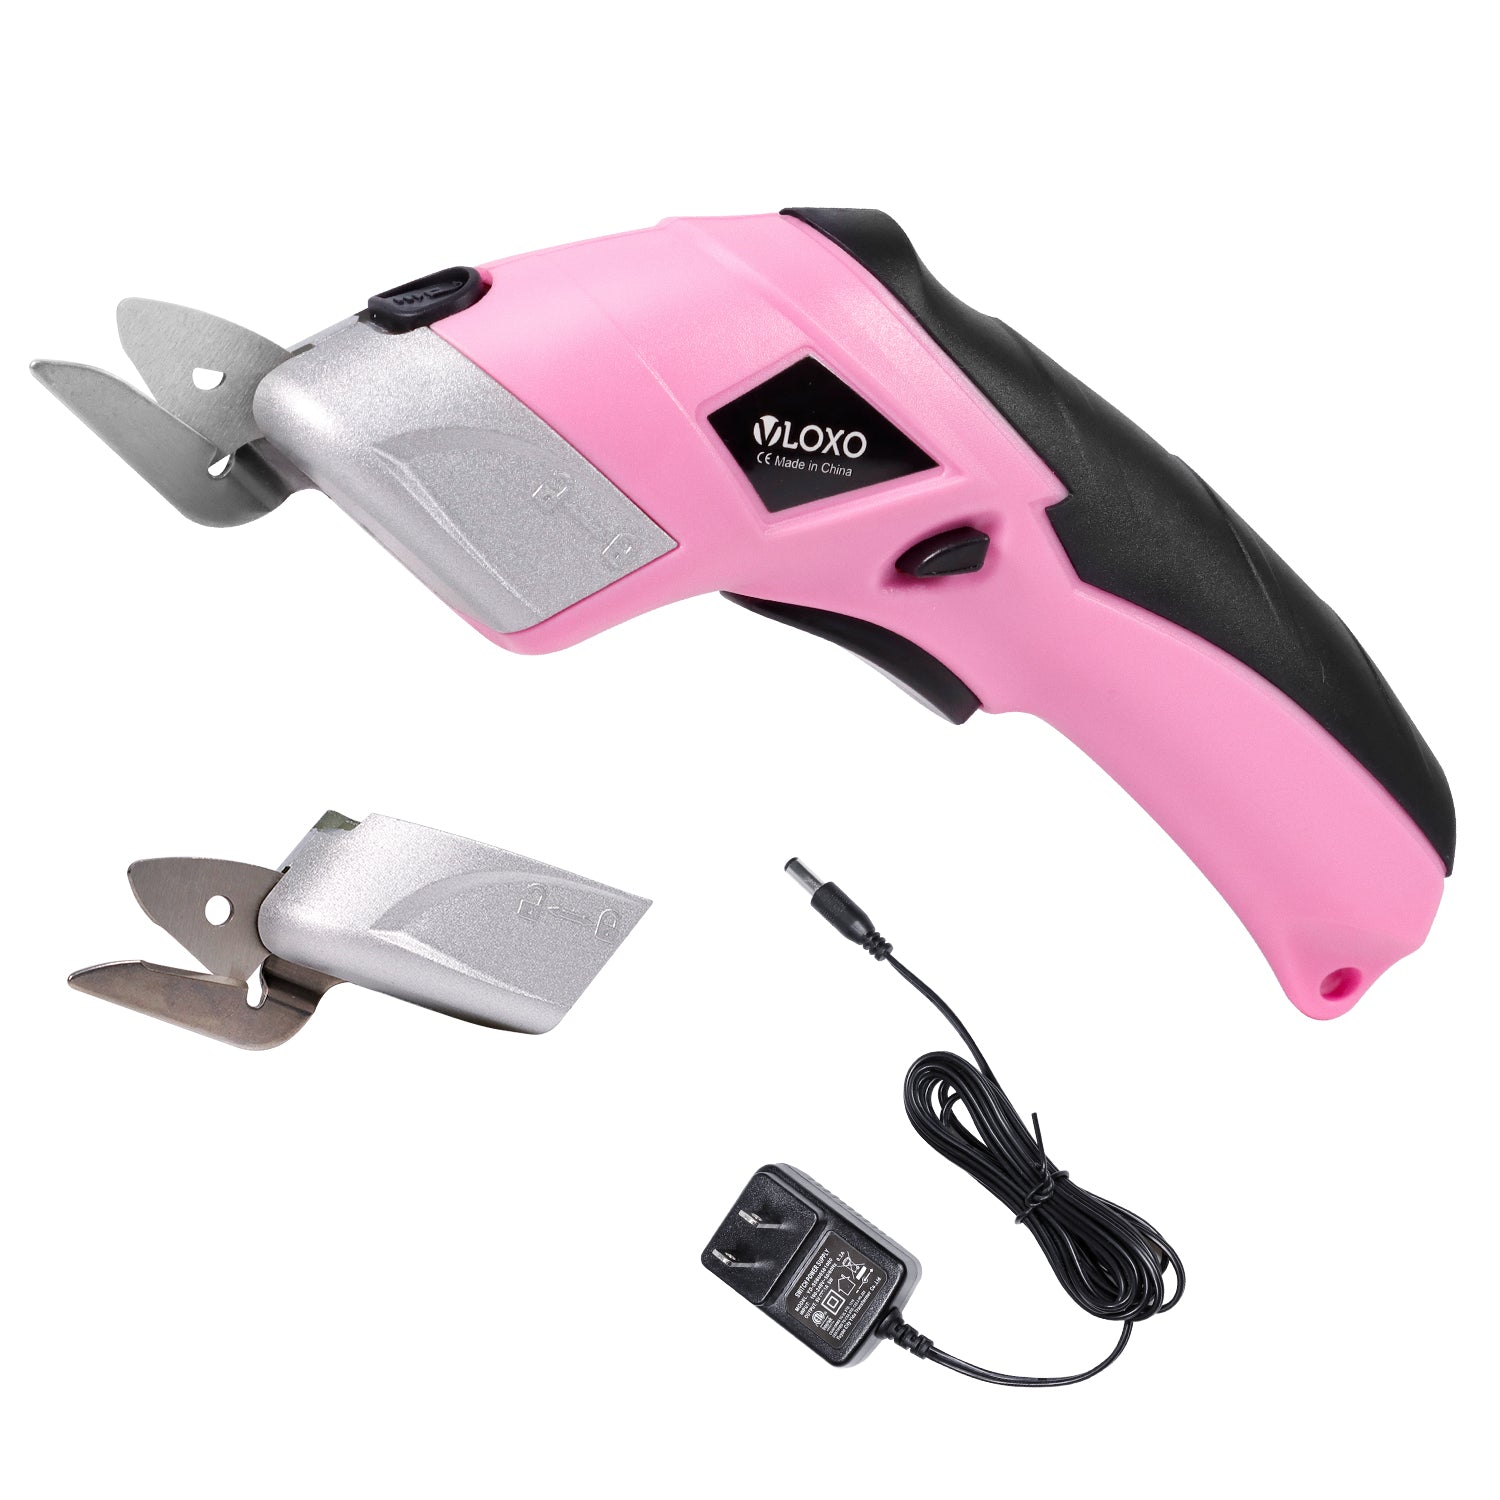 VLOXO Cordless Electric Scissors with 2 Blades